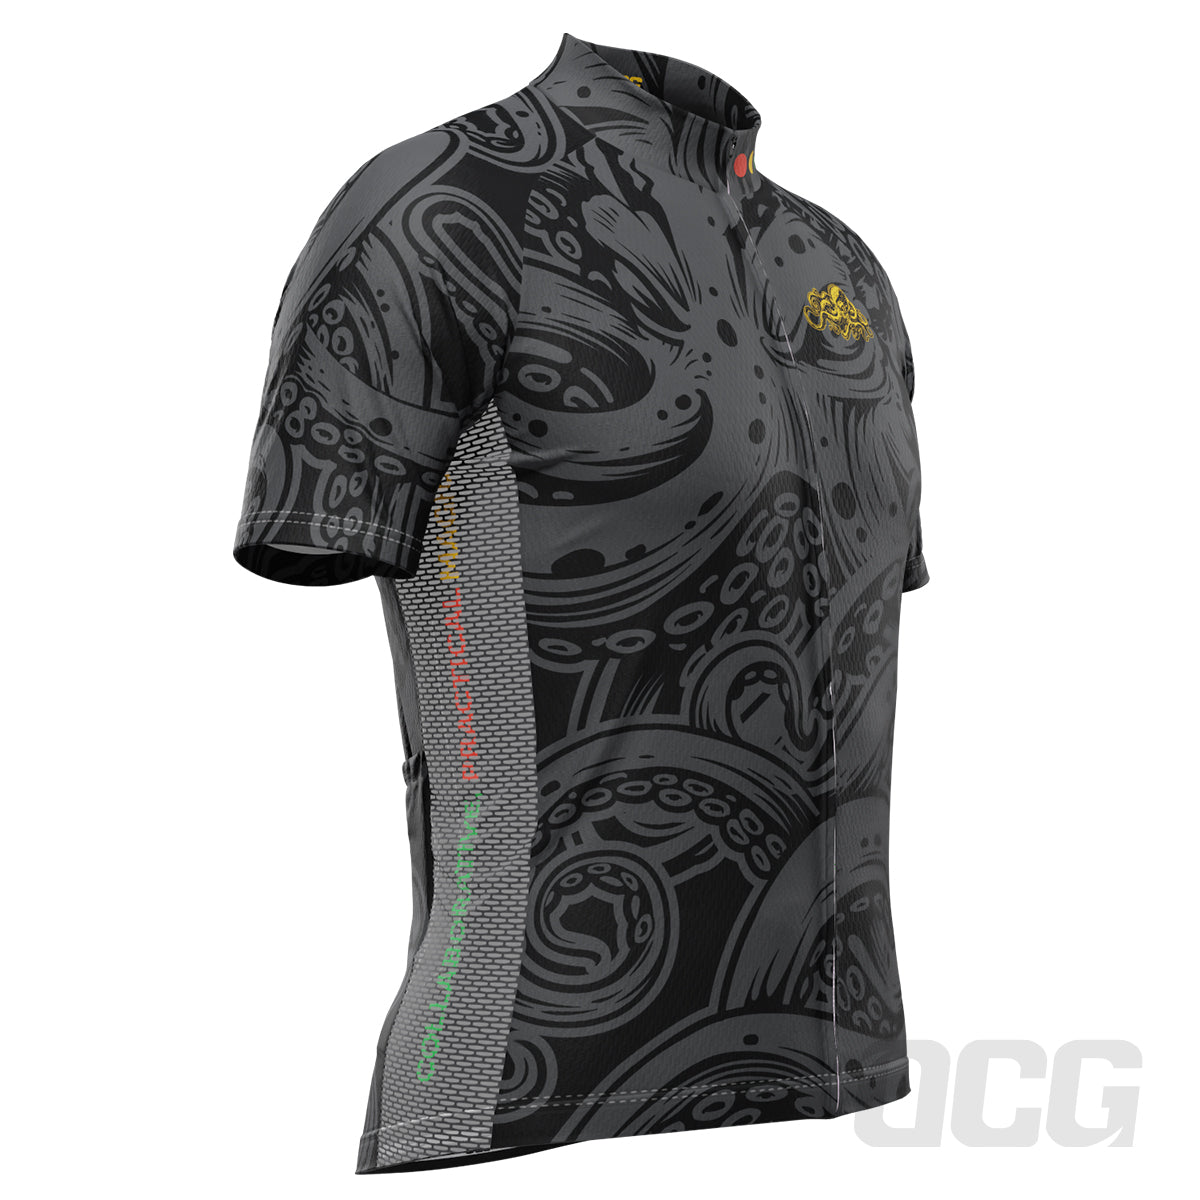 Men's The Black Octopus OCTO Short Sleeve Cycling Jersey